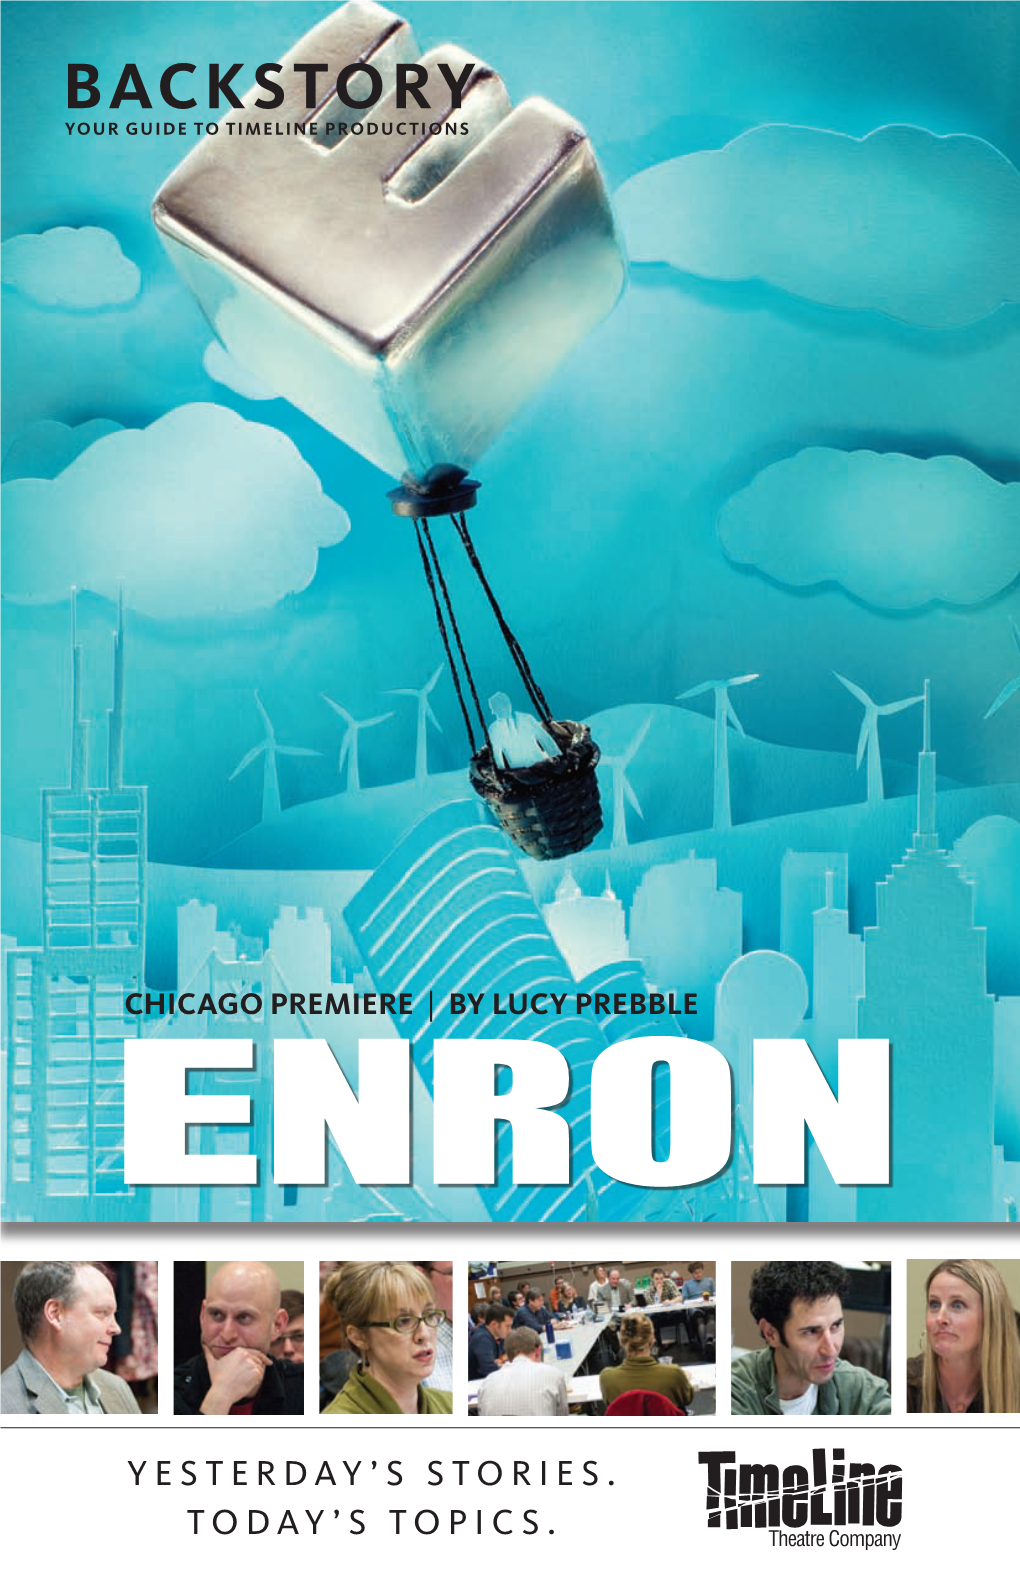 Enron, a Company with One I Saw People Clutching the of the Greatest Business Free New Biography of Steve Jobs